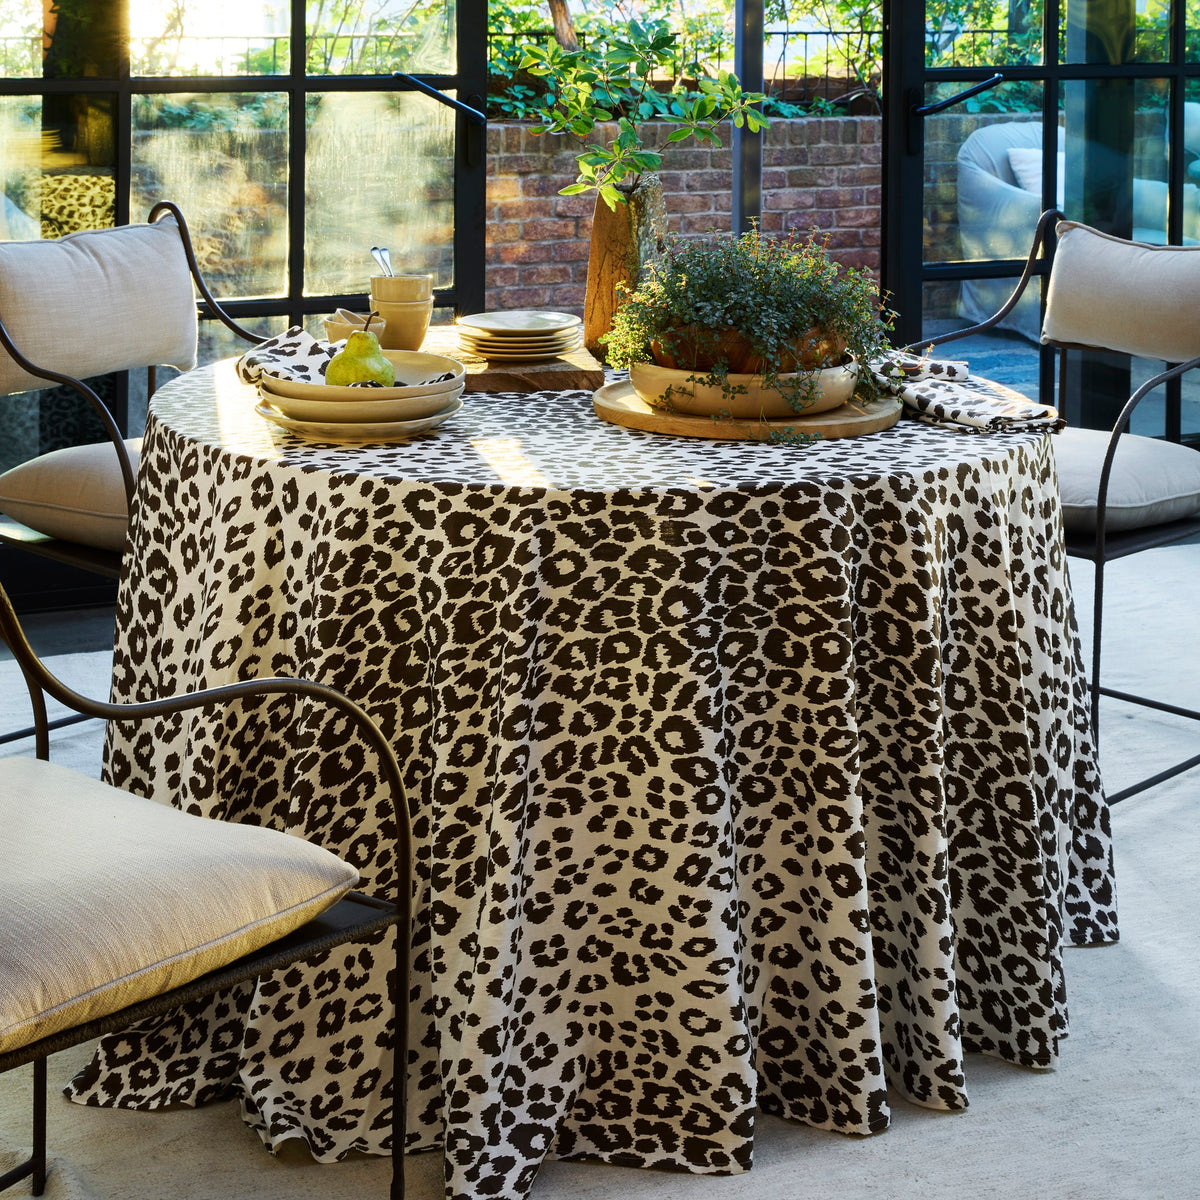 Table Dressed in Matouk Schumacher Iconic Leopard Table Linens in Cinder Color